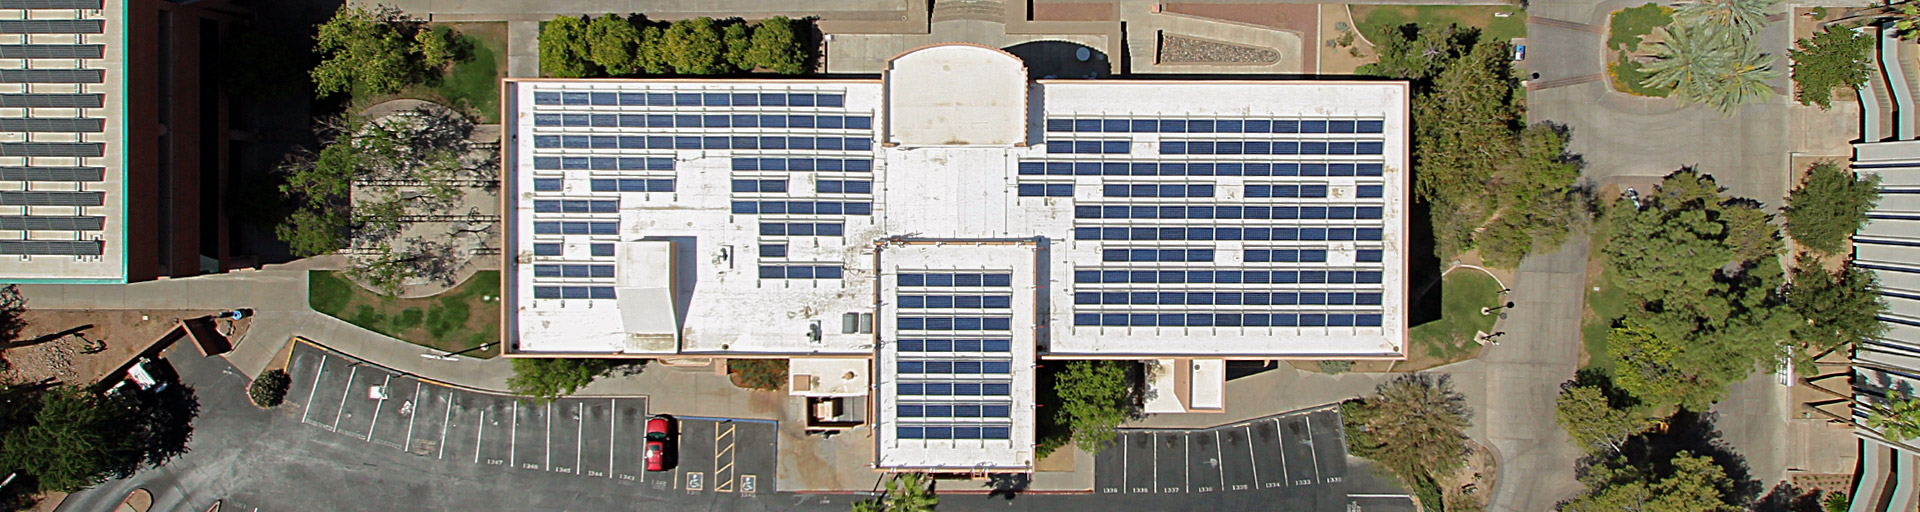 Discovery Hall solar panels - aerial